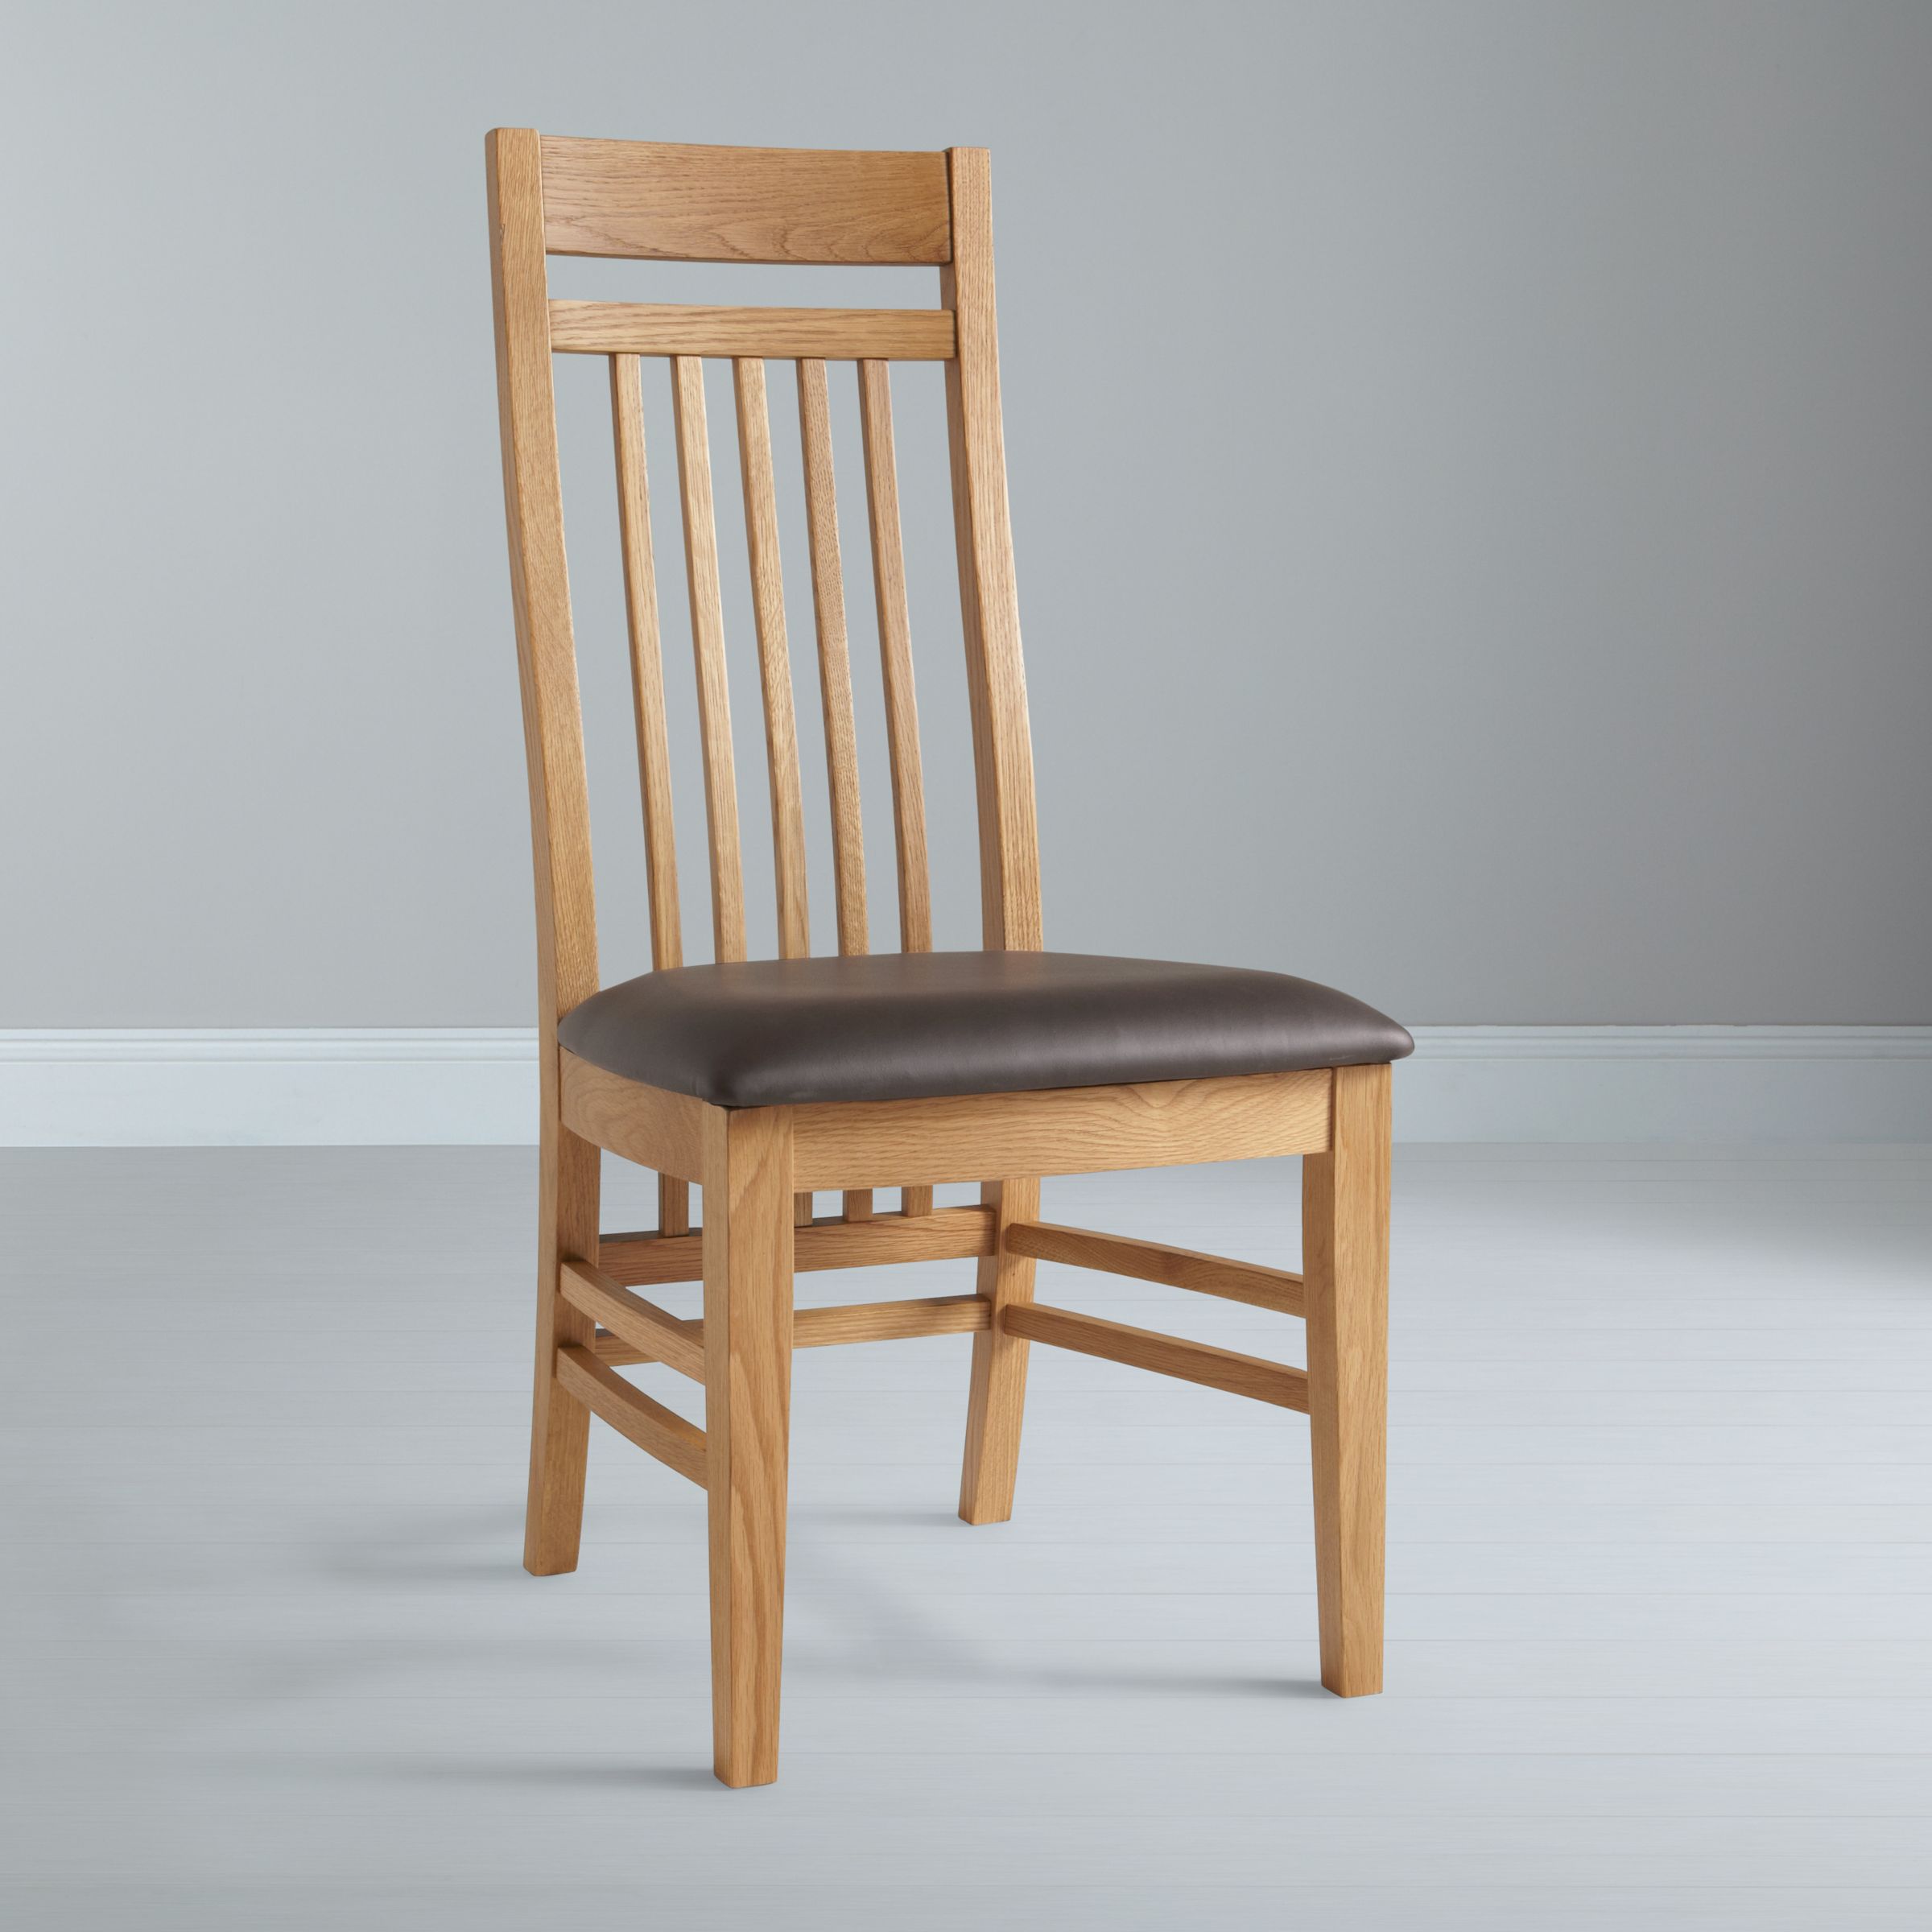 Burford Slatted Dining Chair 230522953